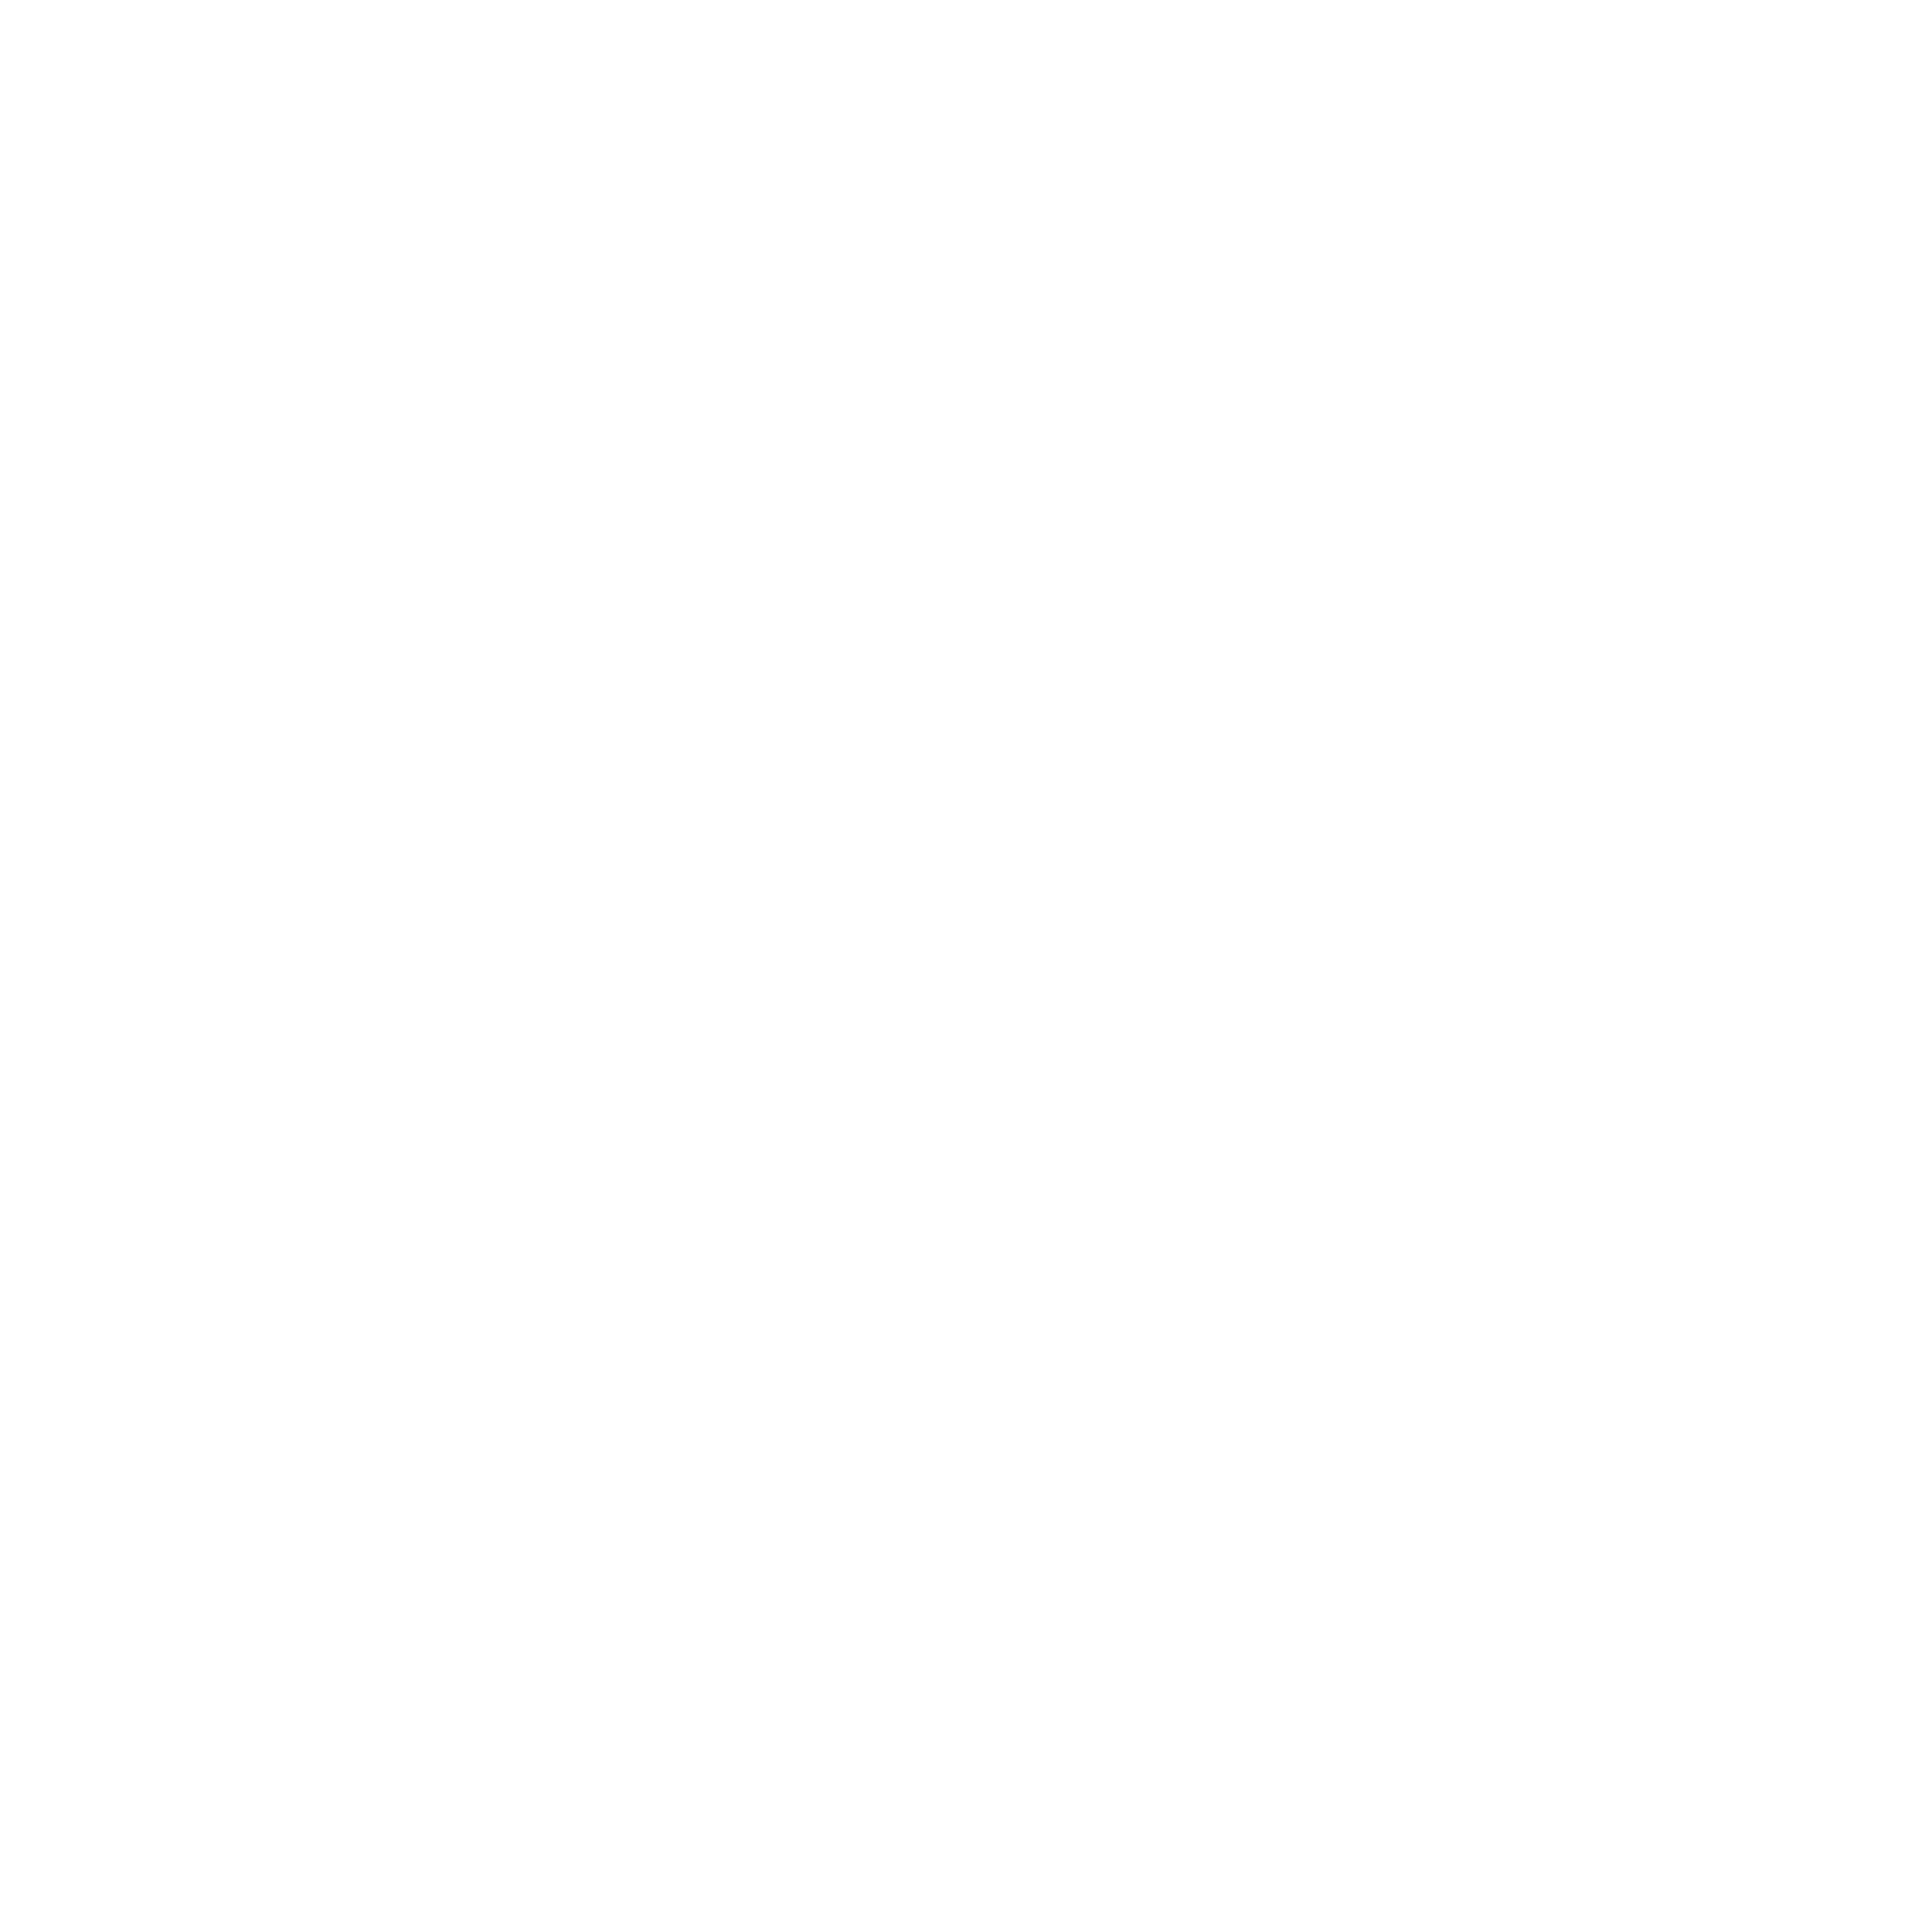 Are the sounds you hear